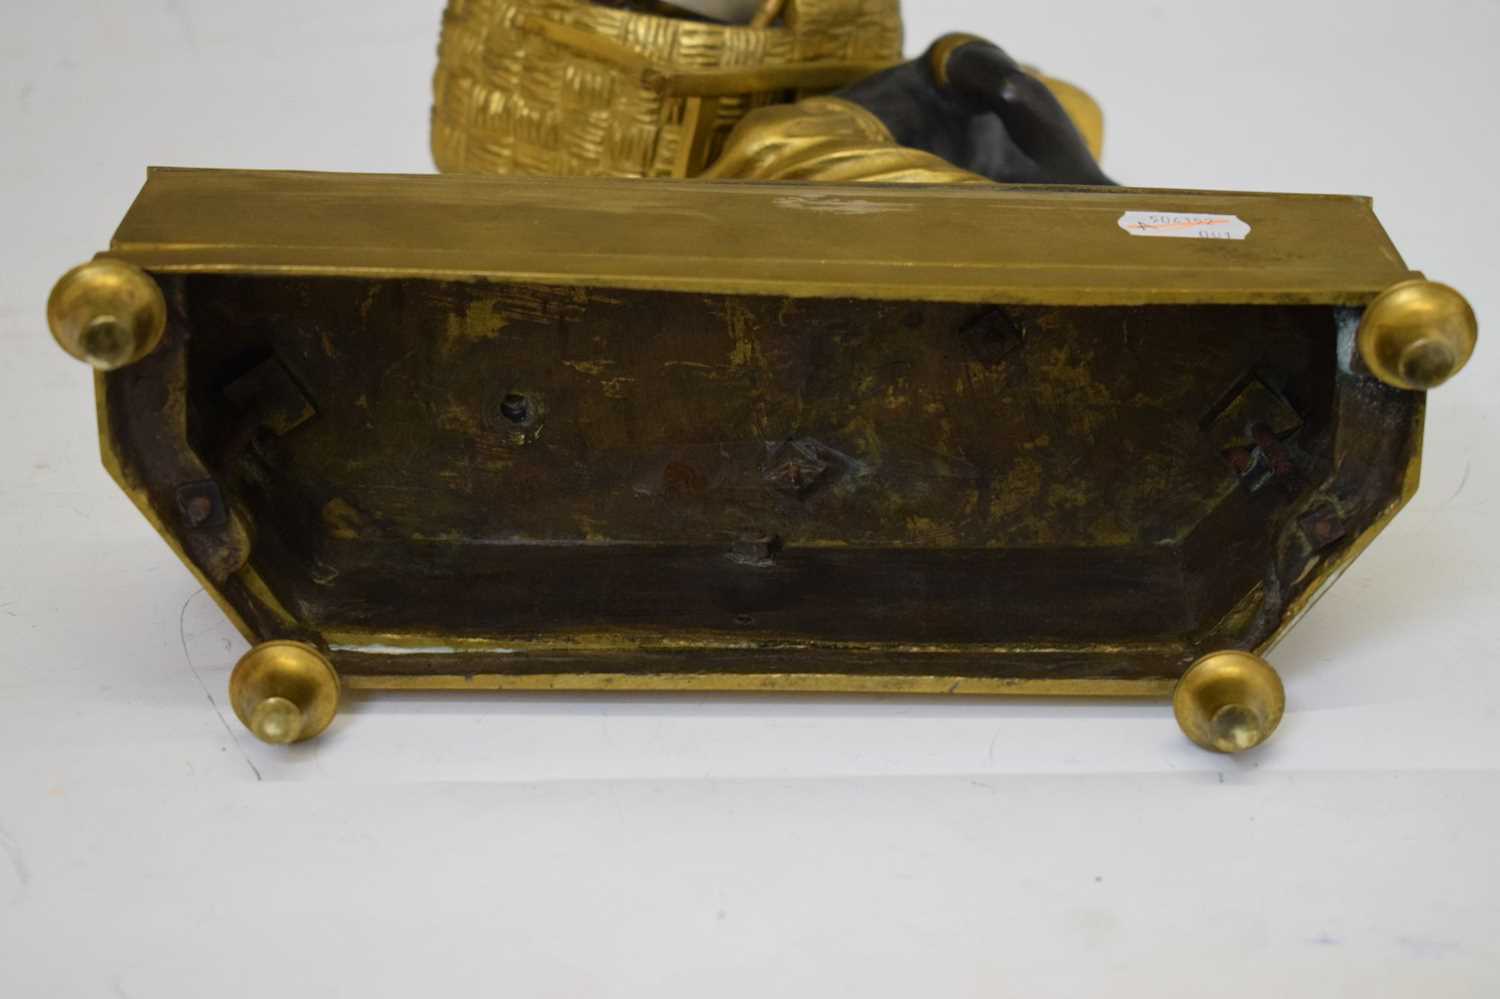 Early 19th century French Empire patinated bronze and ormolu figural mantel clock - Image 15 of 17